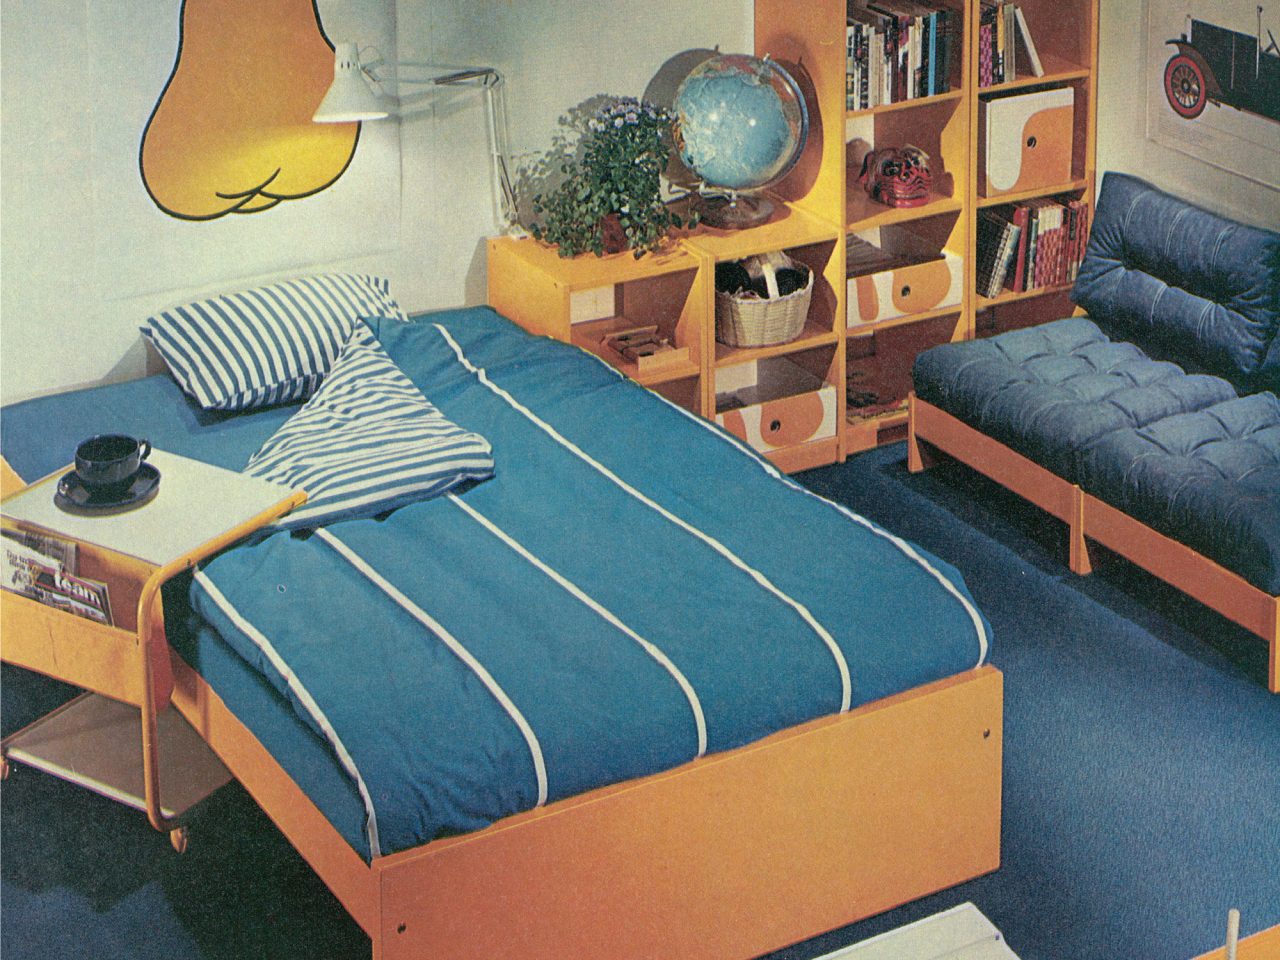 1976 IKEA catalogue image, a wooden bed with blue and white striped POLKA duvet and pillow covers.